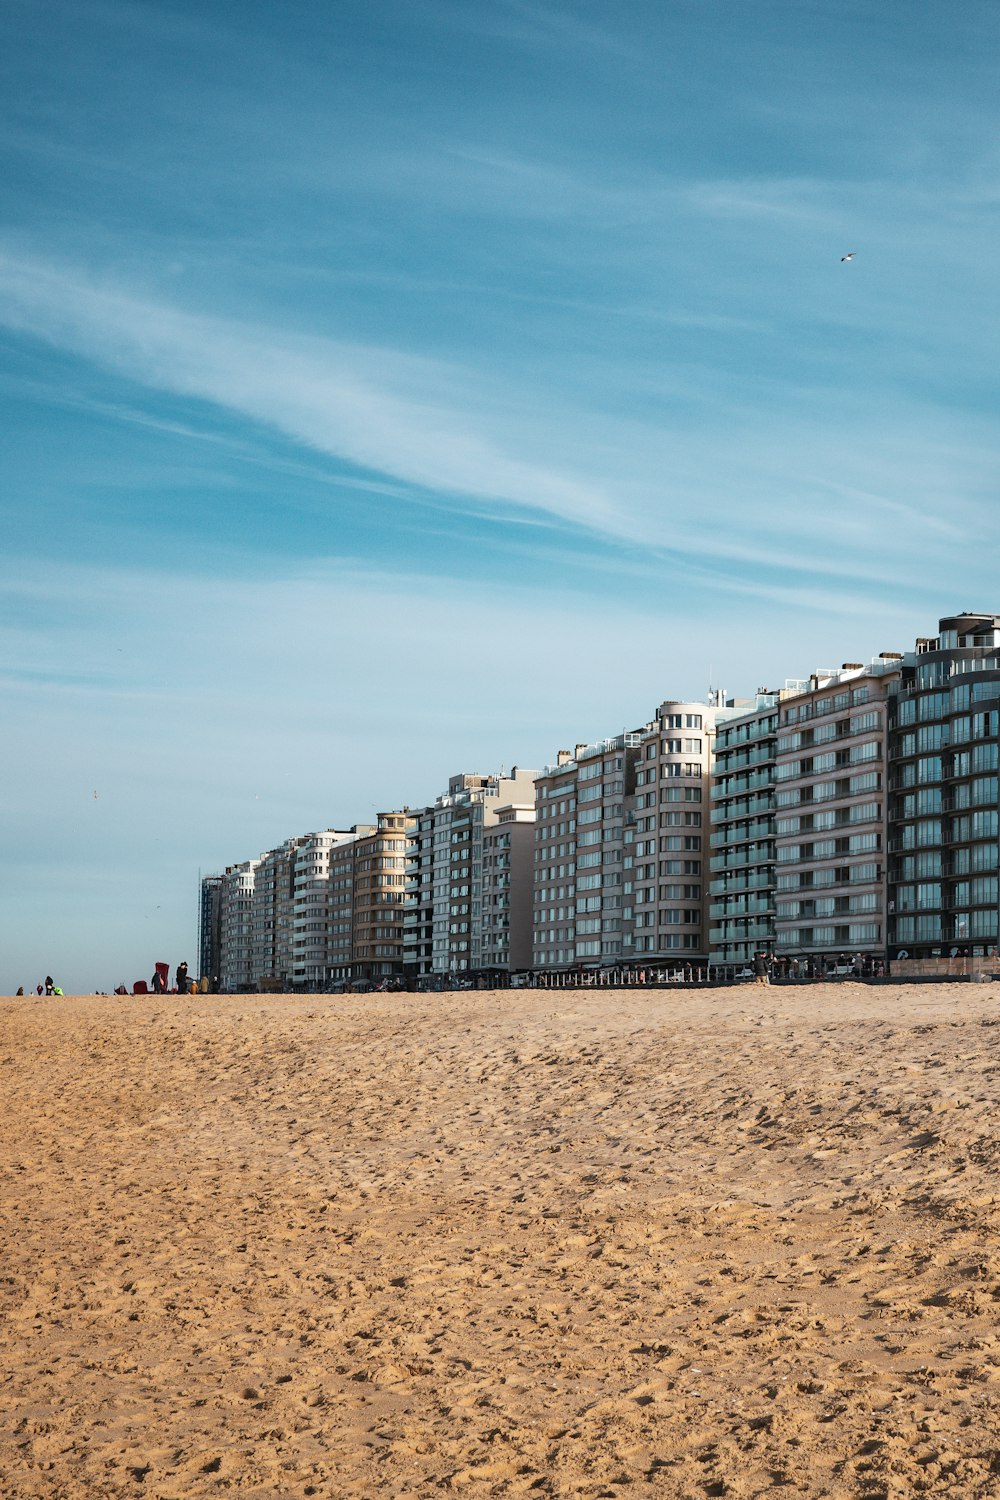 a row of apartment buildings sitting on top of a sandy beach